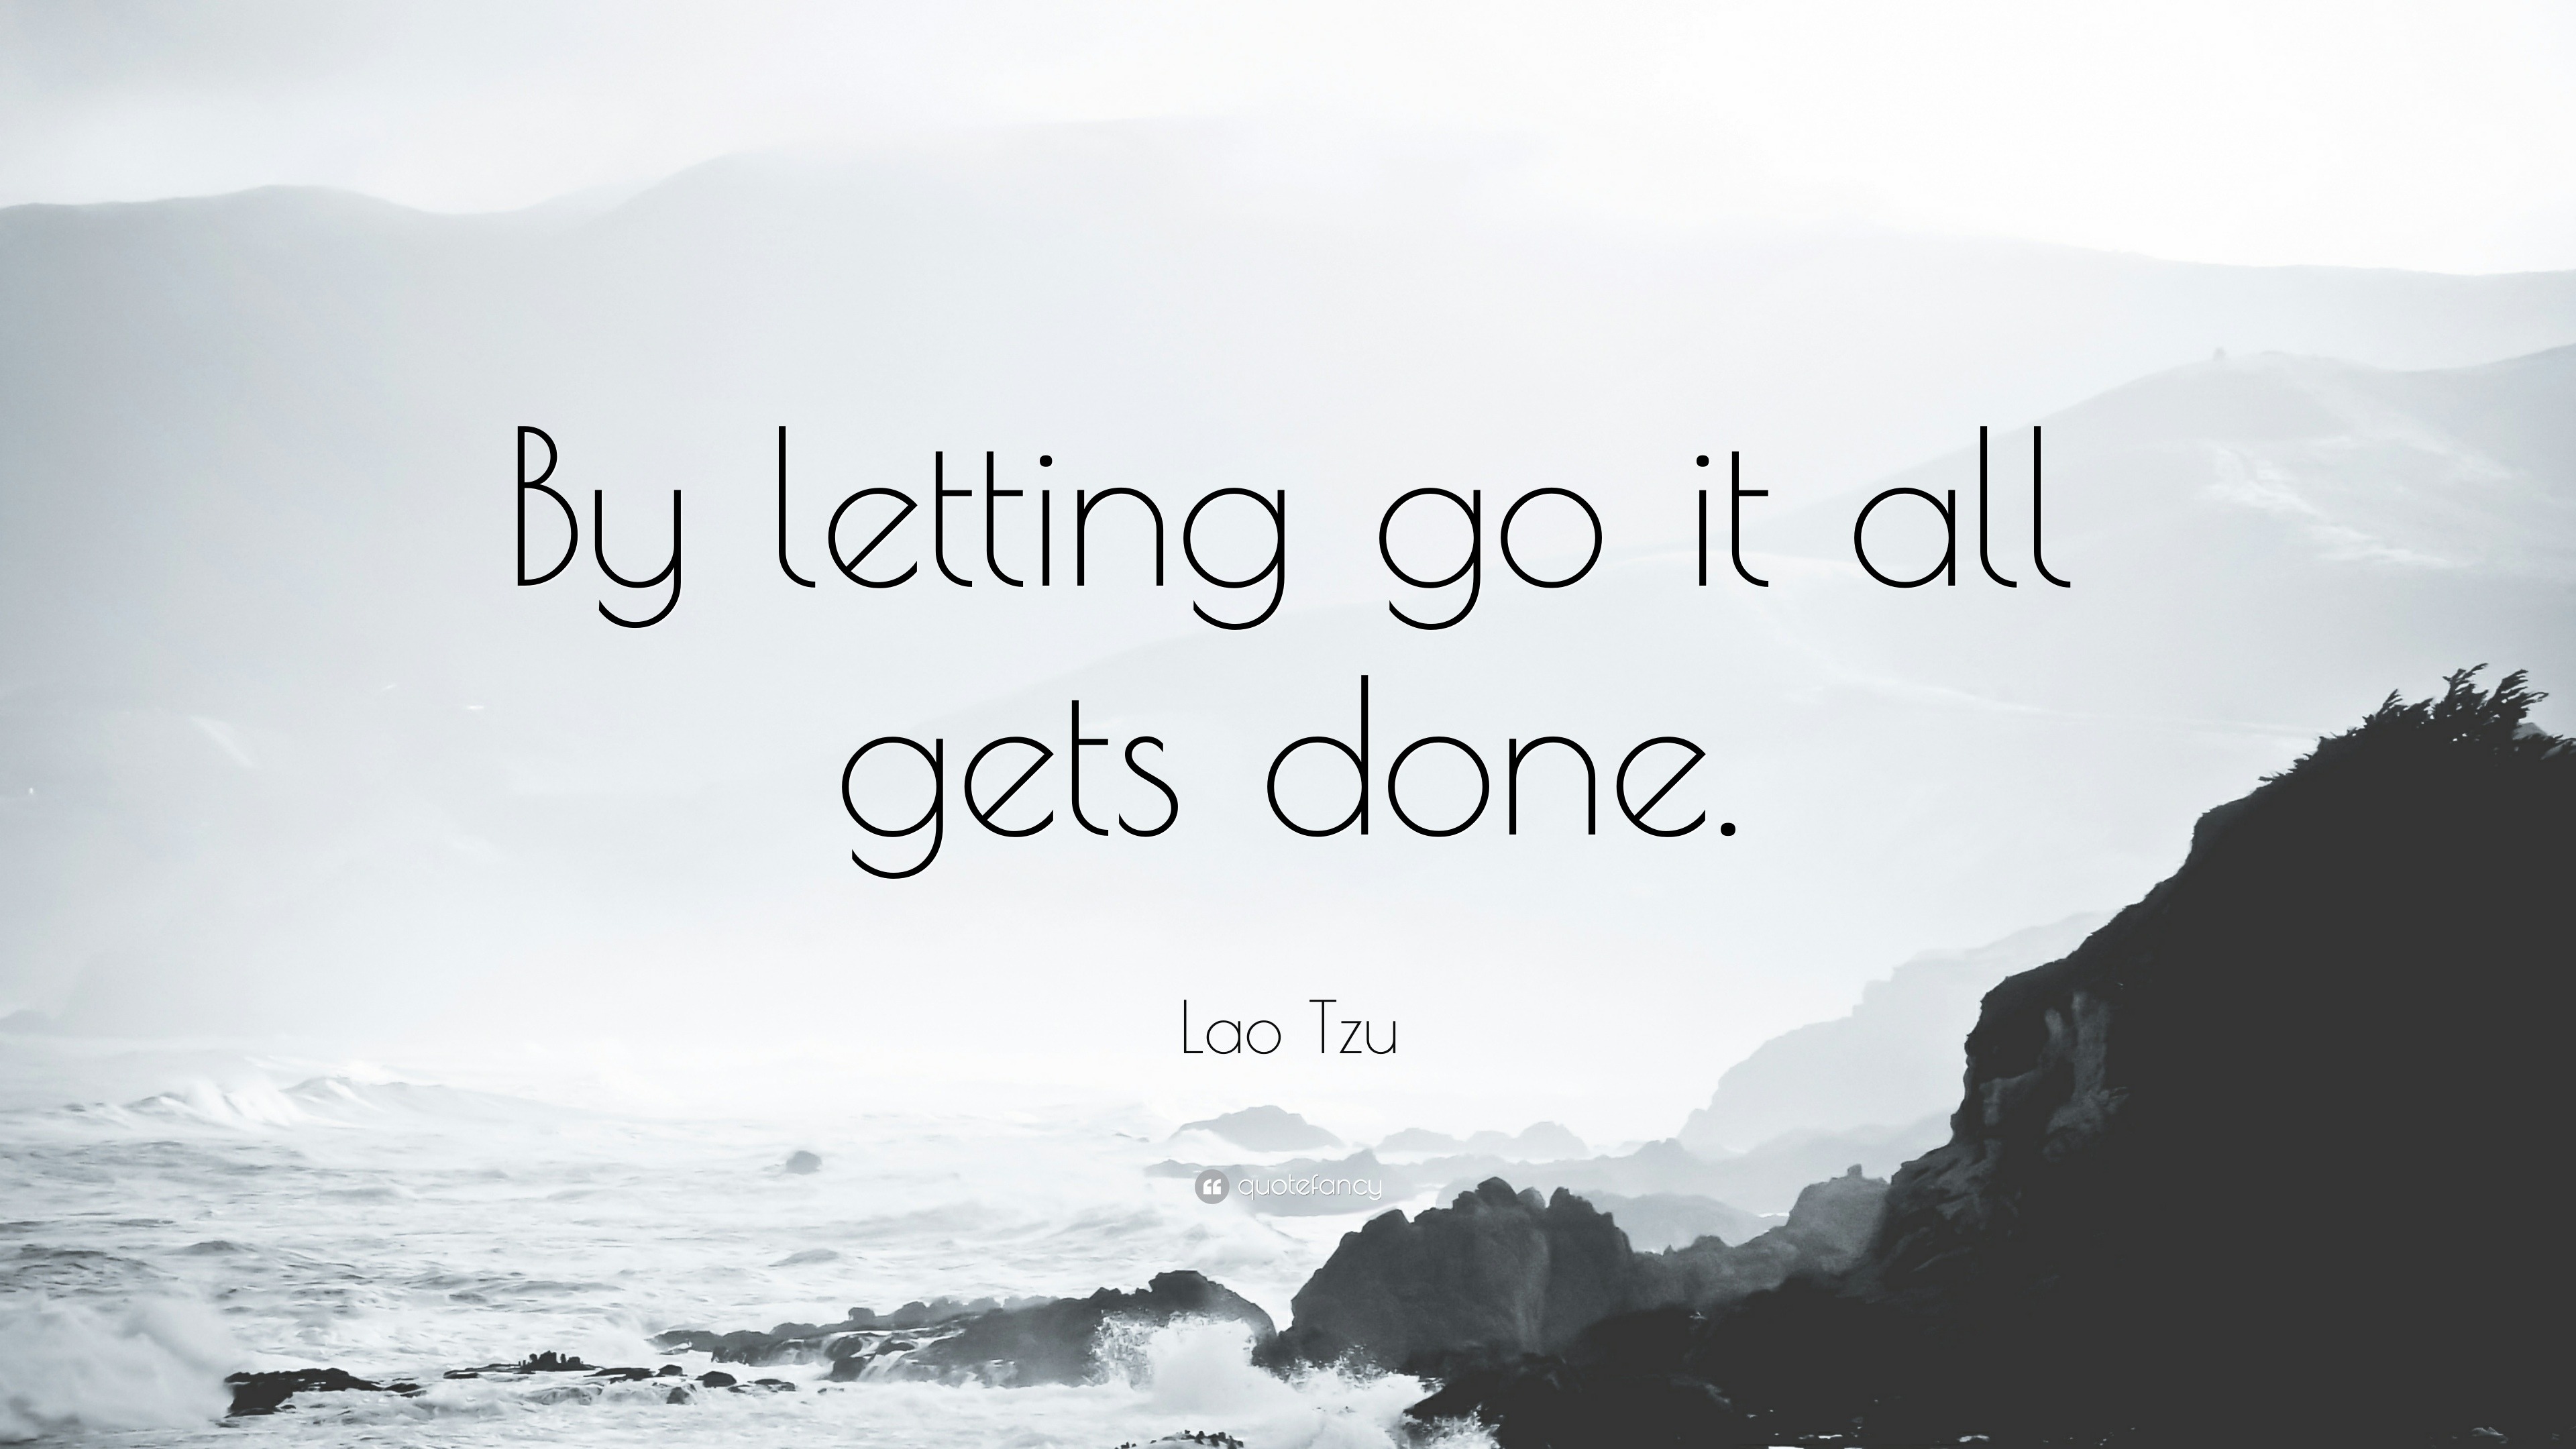 Lao Tzu Quote “By letting go it all gets done.” (22